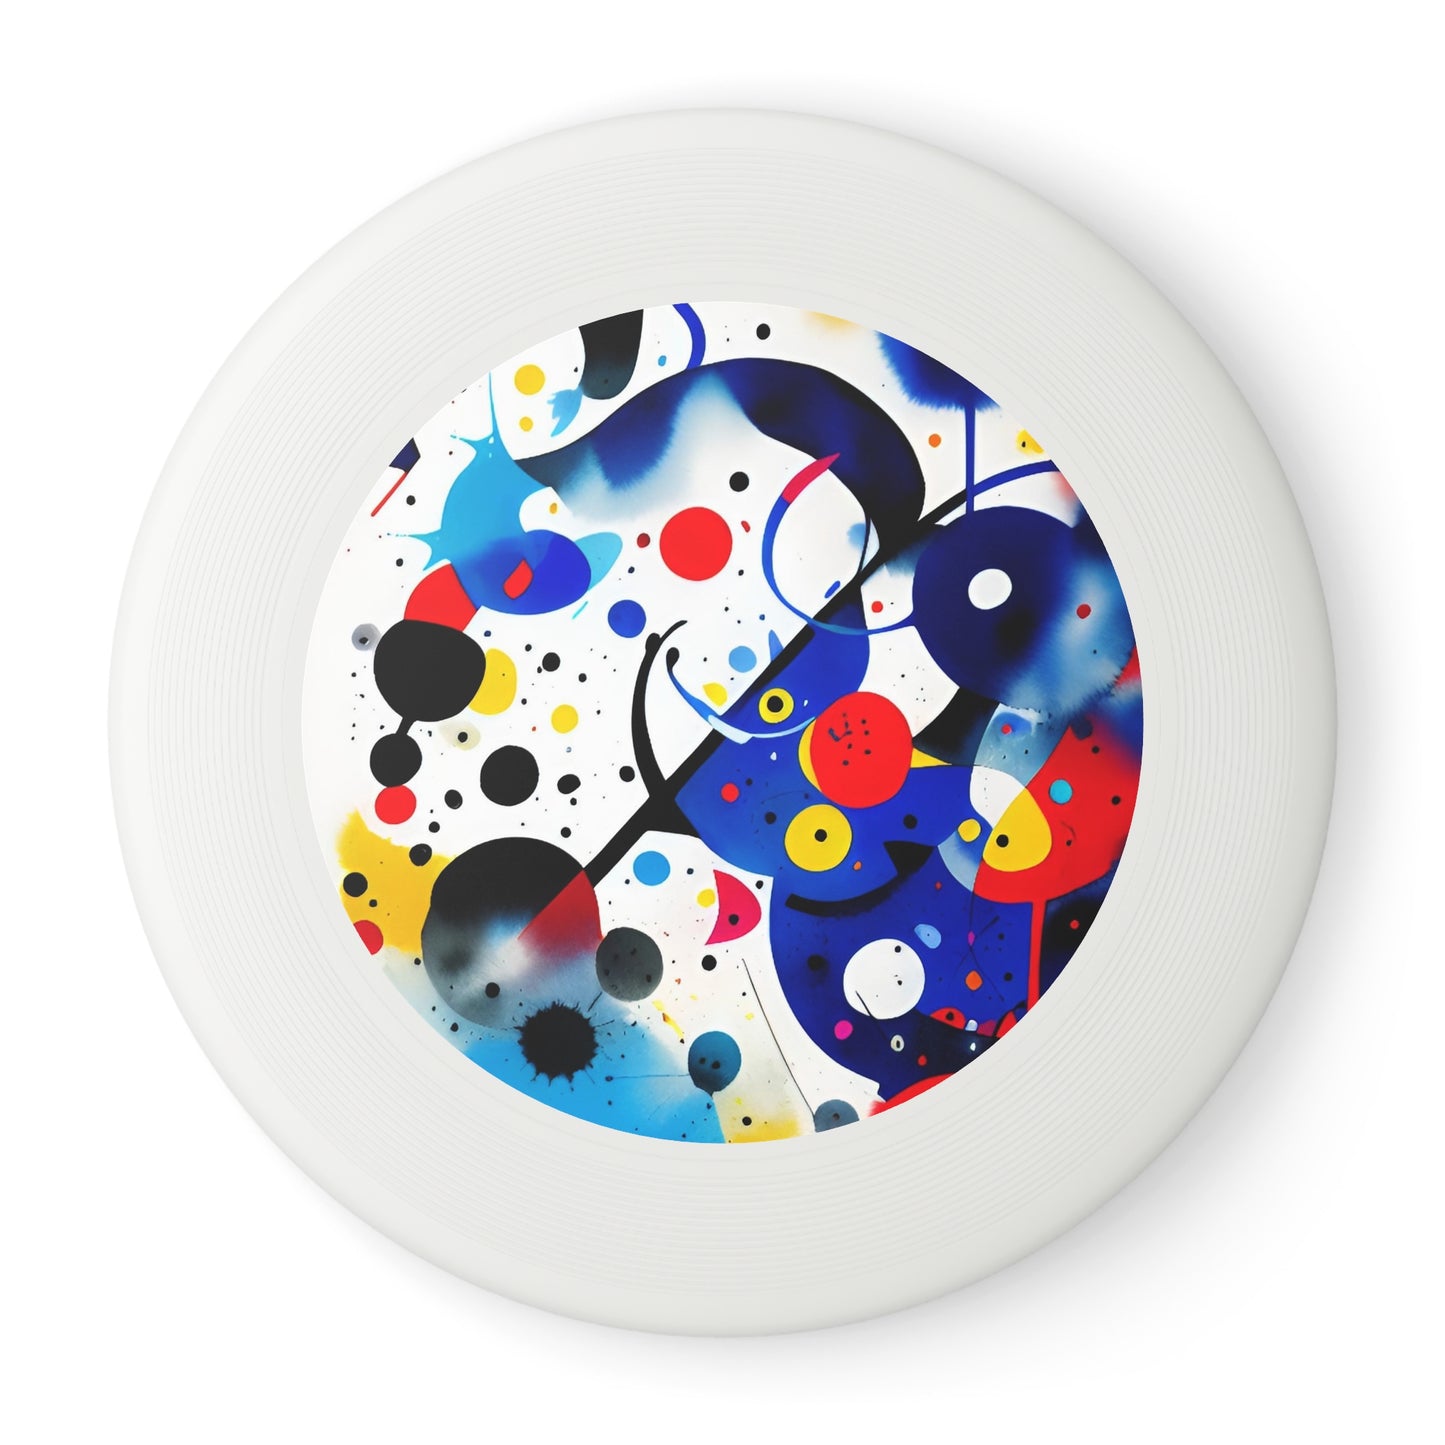 Wham-O Frisbee, Inspired by Miro